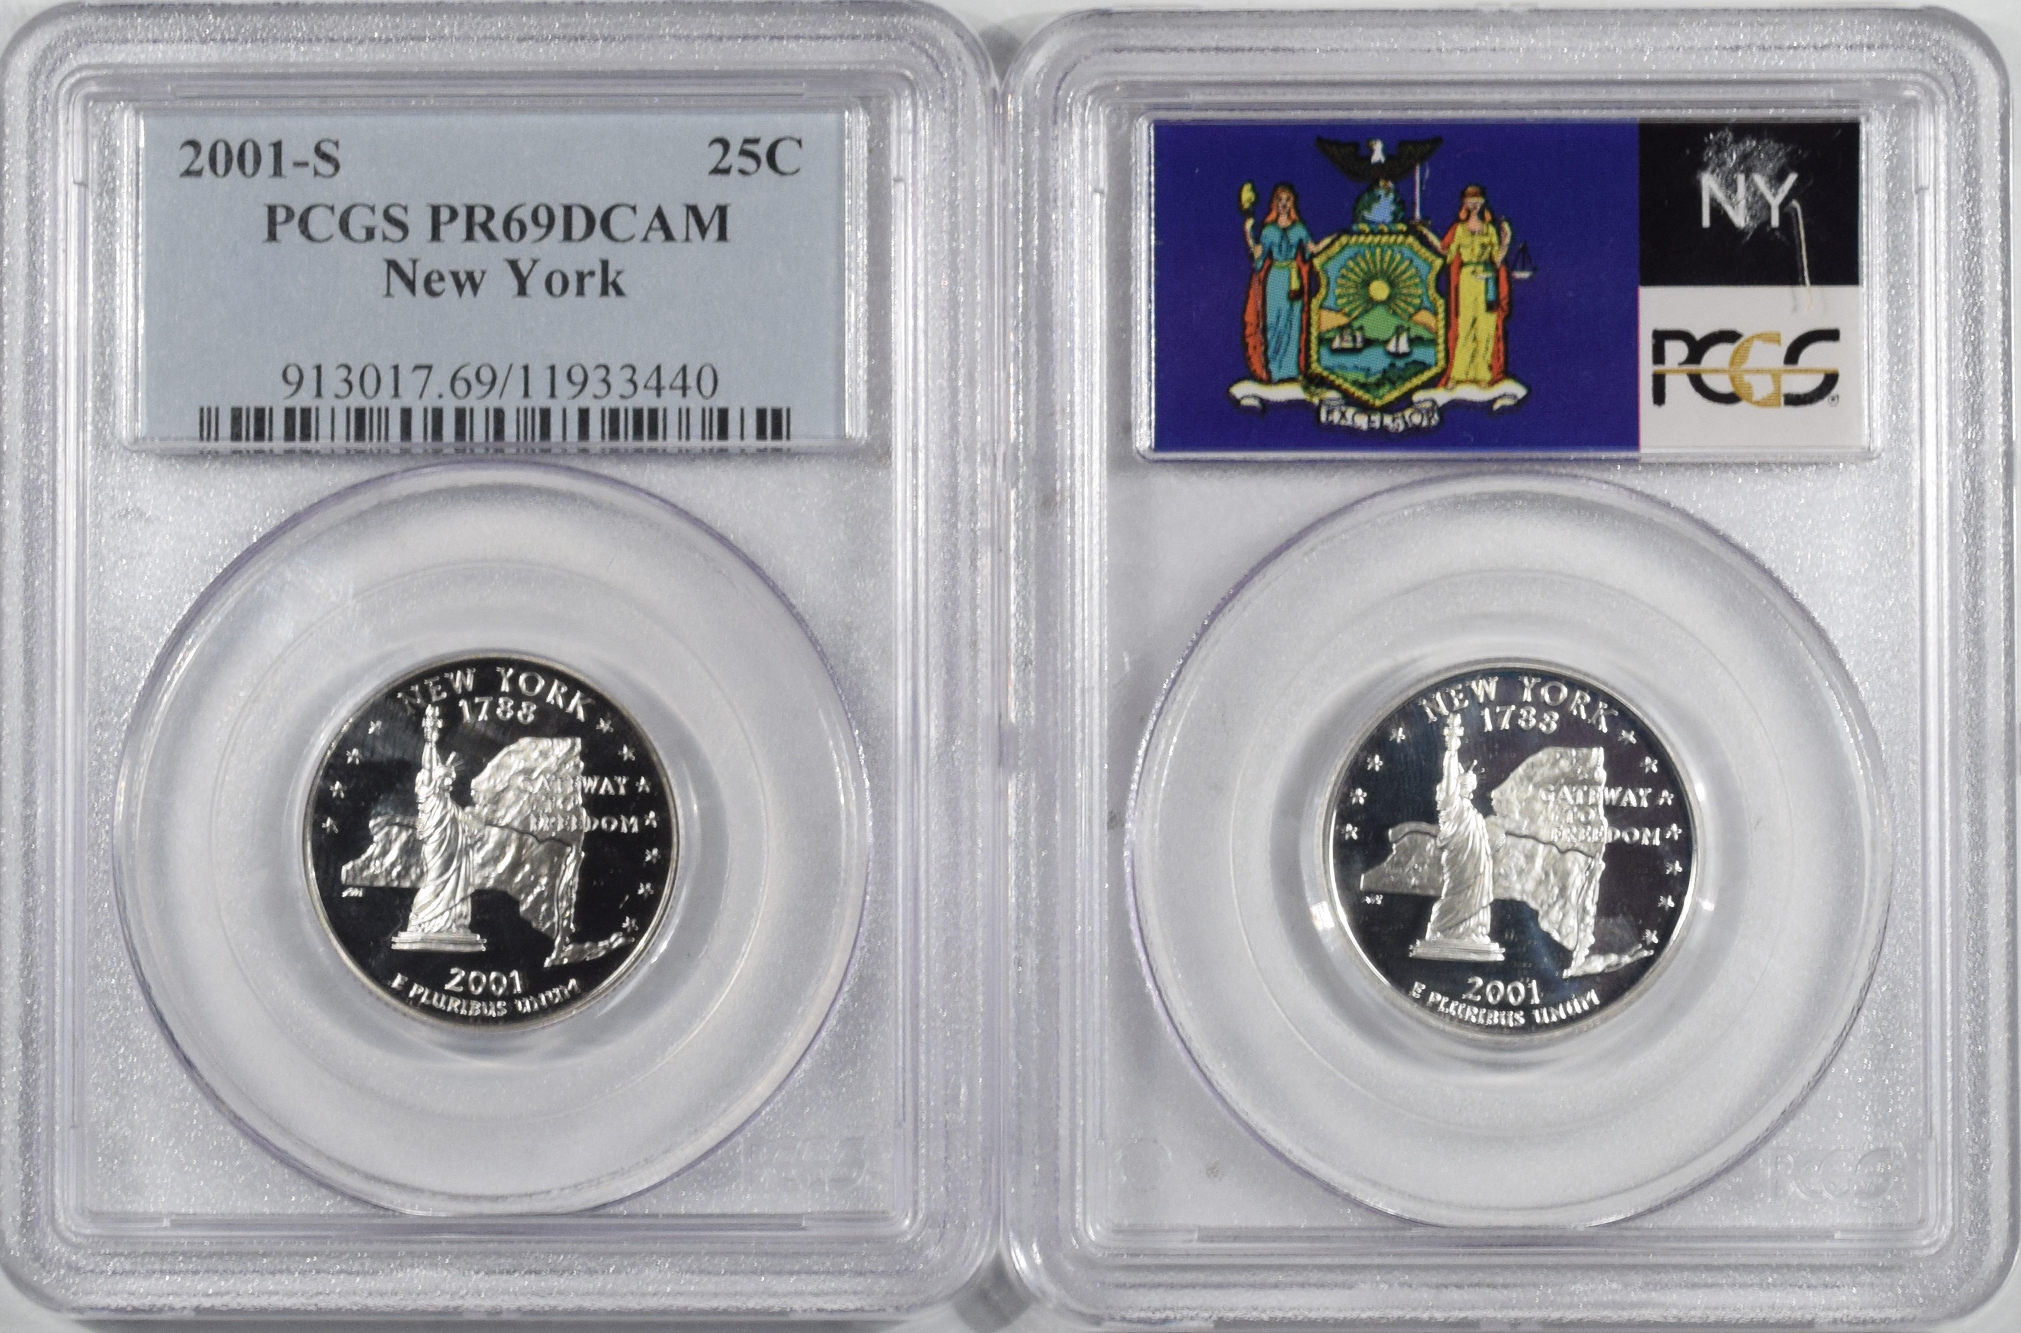 2001-S NEW YORK PROOF STATE QUARTER 2 COIN SILVER & CLAD ...